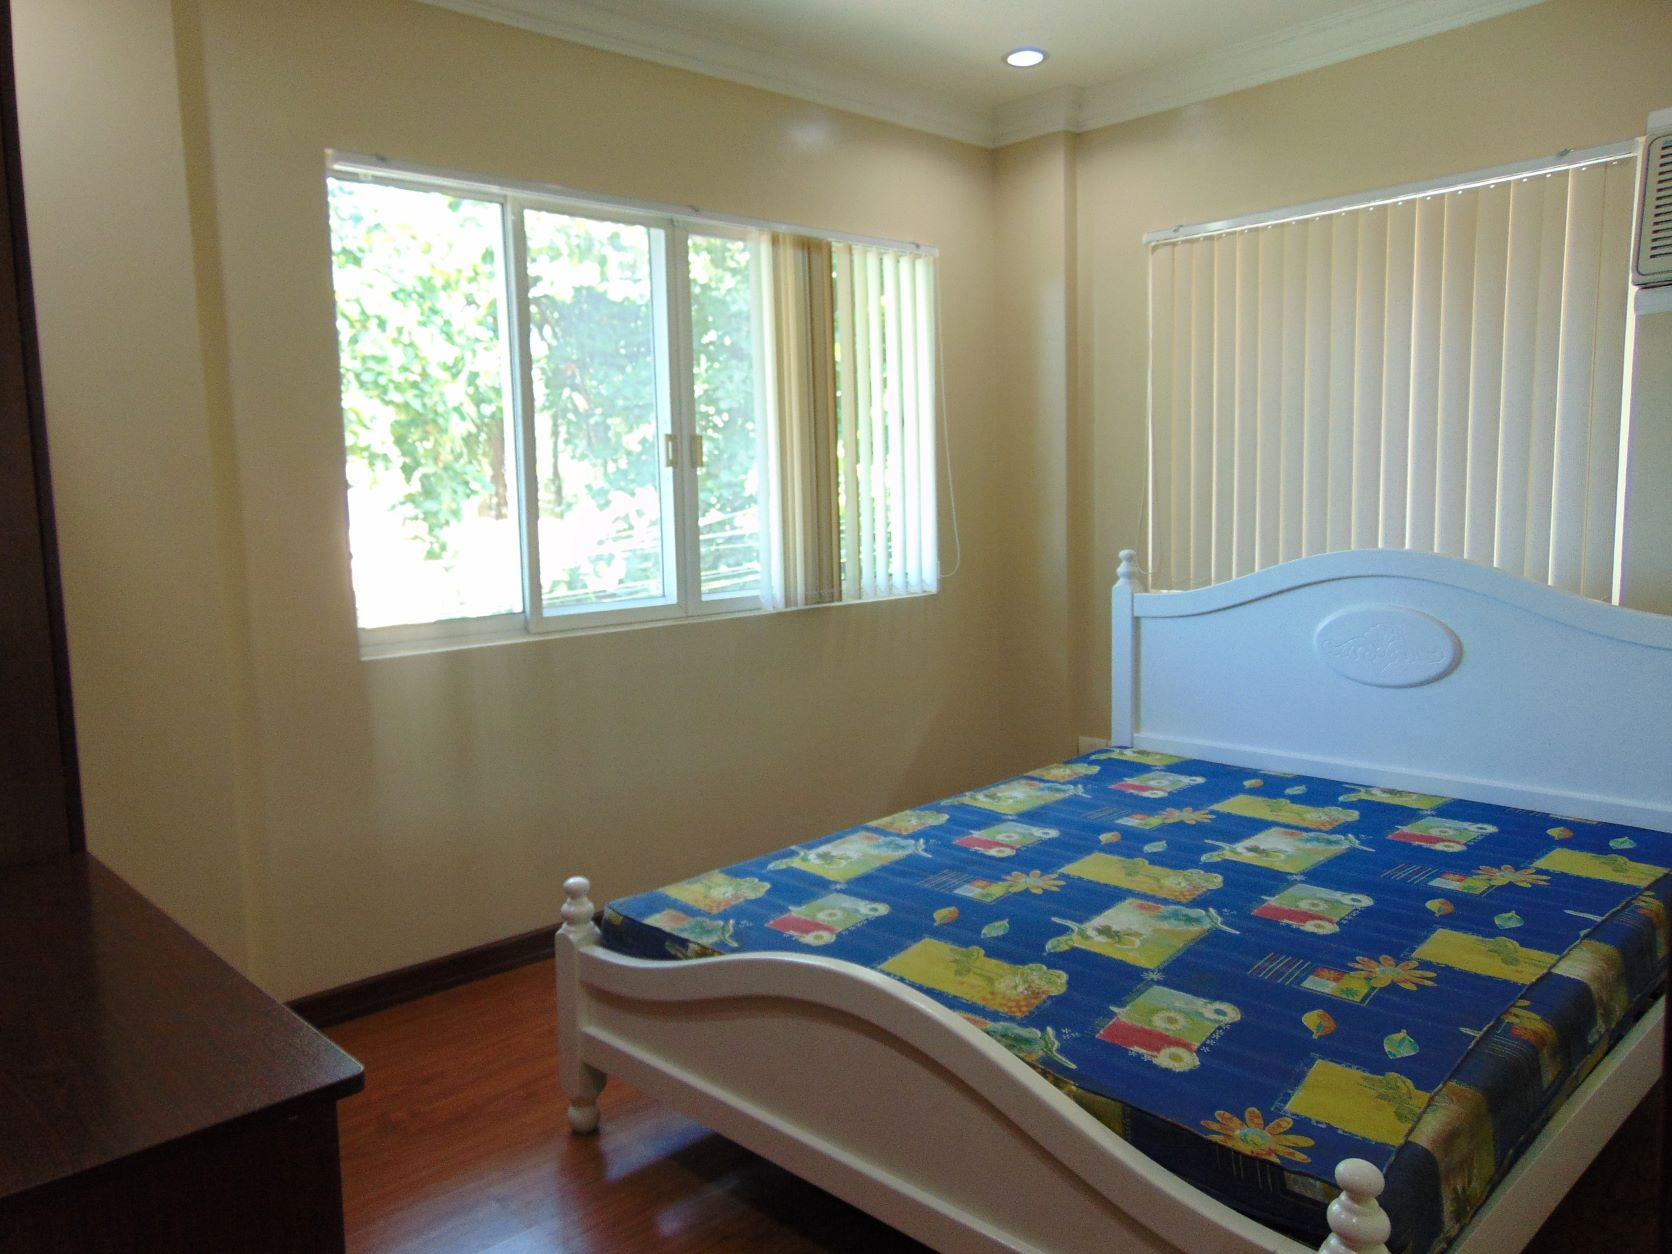 4-bedroom-semi-furnished-house-located-in-mabolo-cebu-city